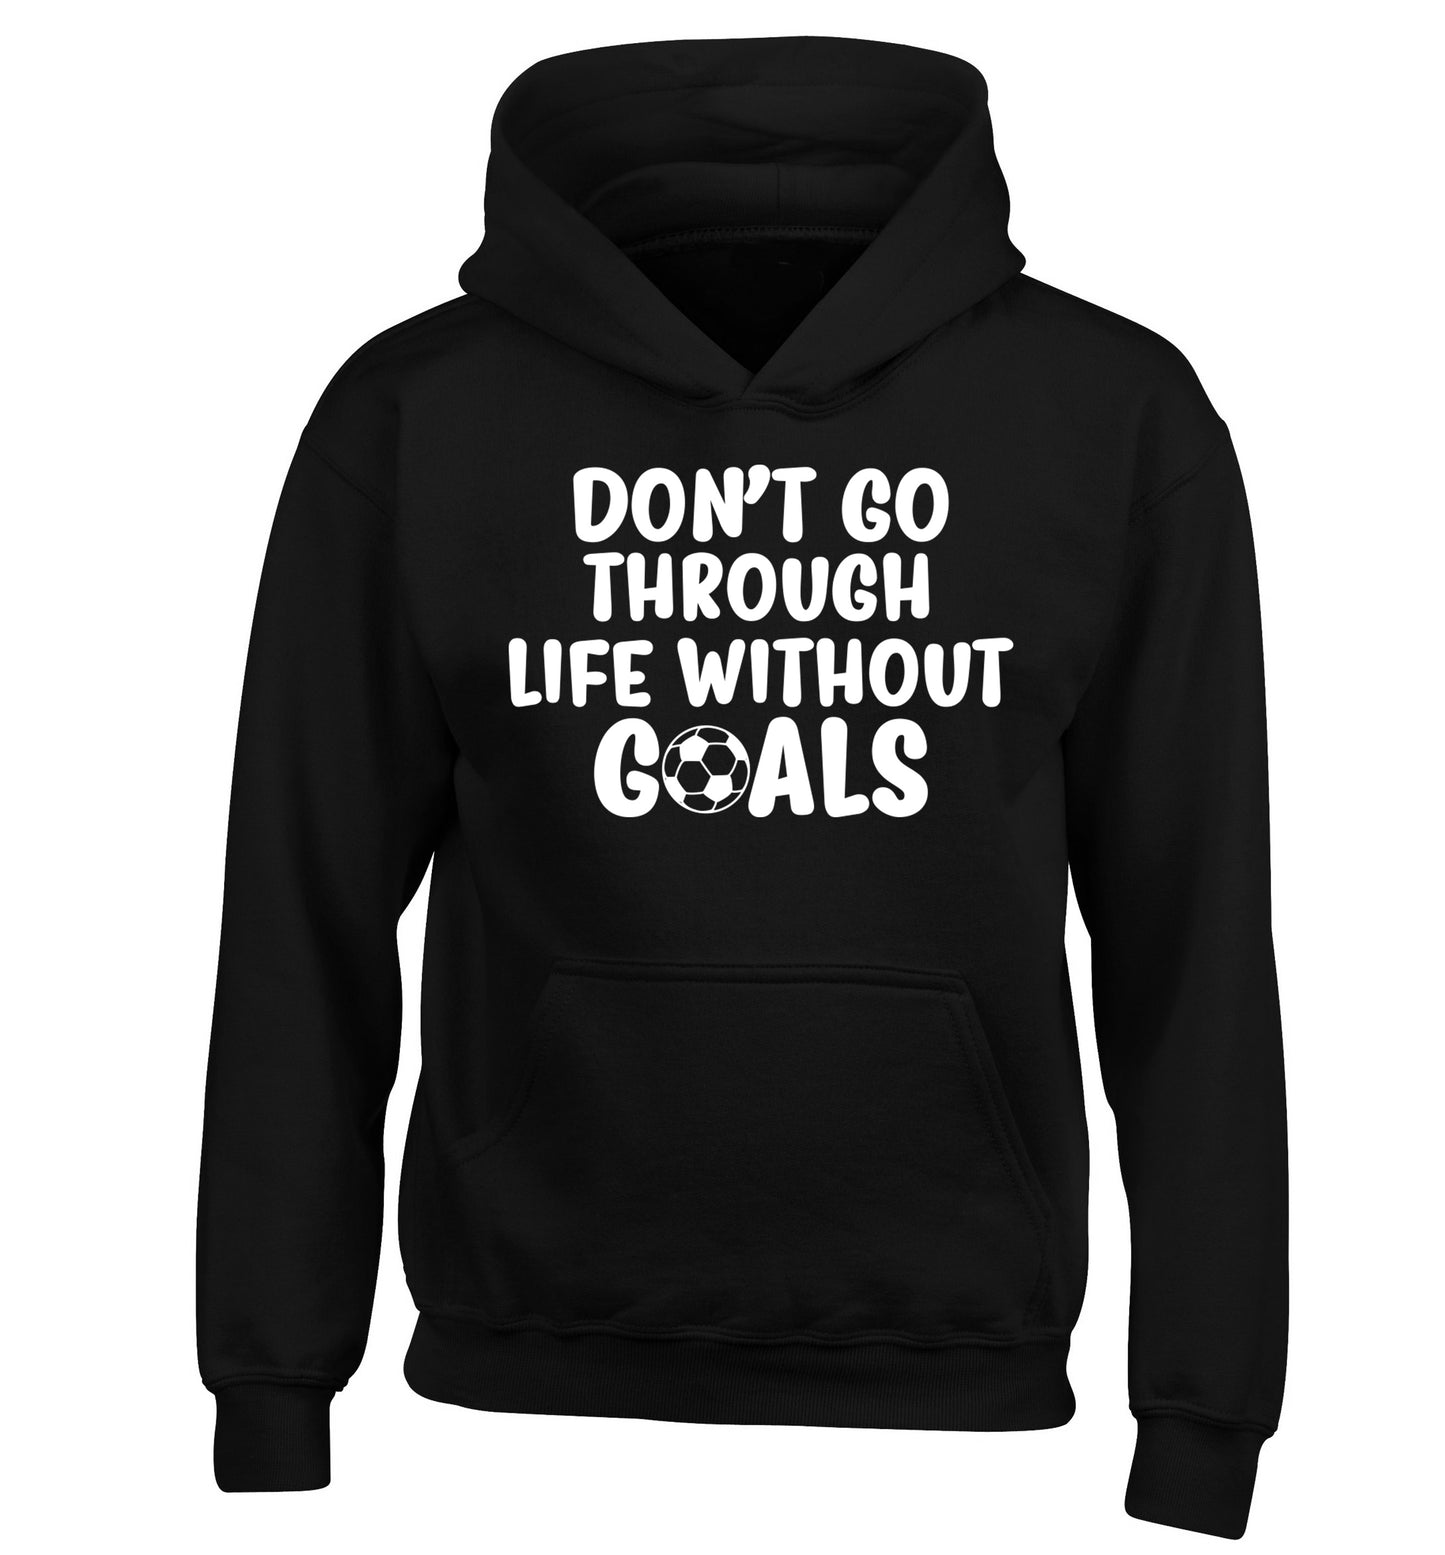 Don't go through life without goals children's black hoodie 12-14 Years